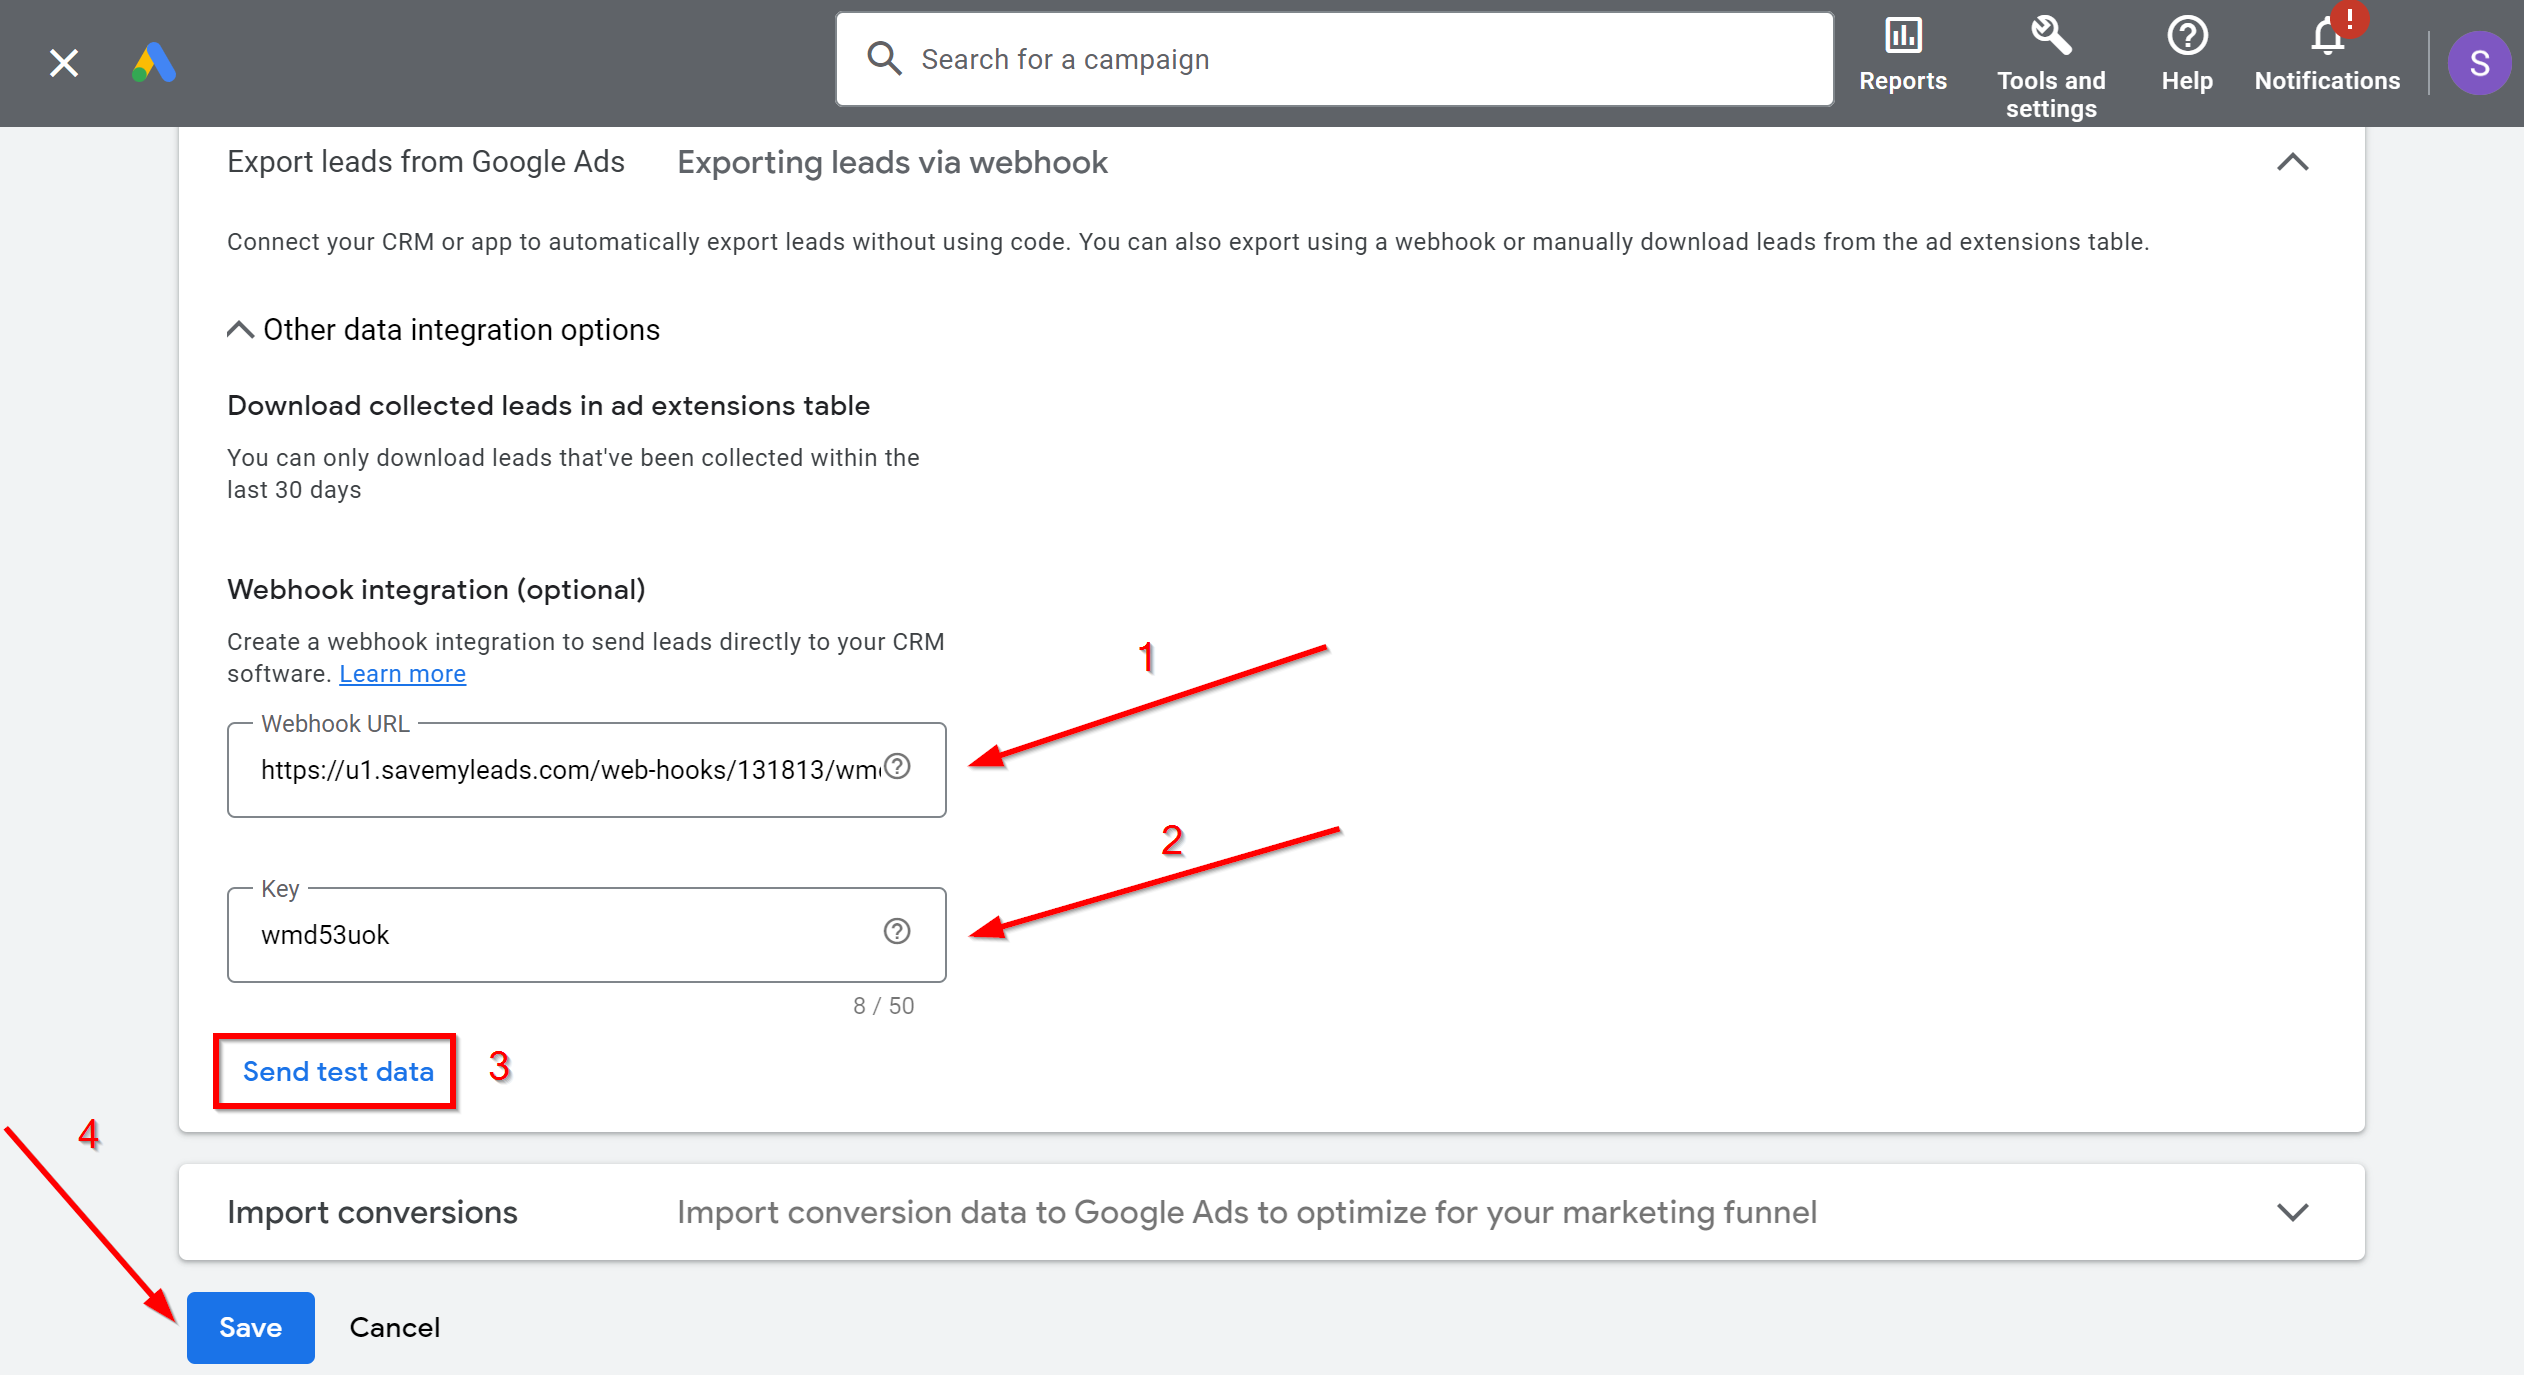 How to Connect Google Lead Form with SMSGlobal | Data Source account connection